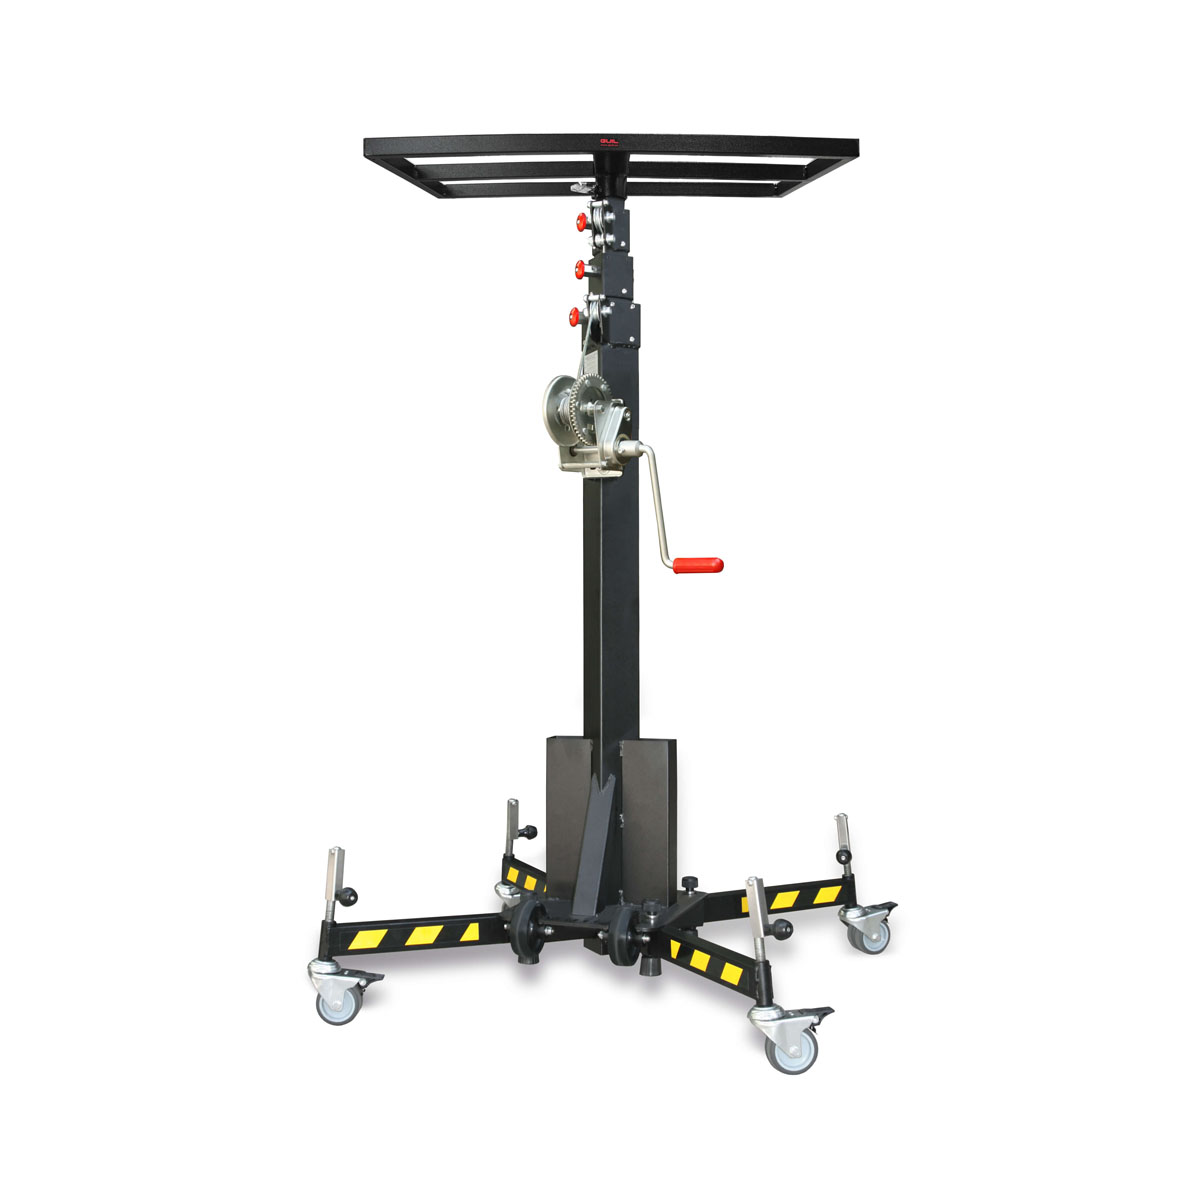 Buy Material Lifter - 4.56m (With Wheels) by GUIL in Utility Lifters | Materials Handling Lift Towers from GUIL available at Astrolift NZ